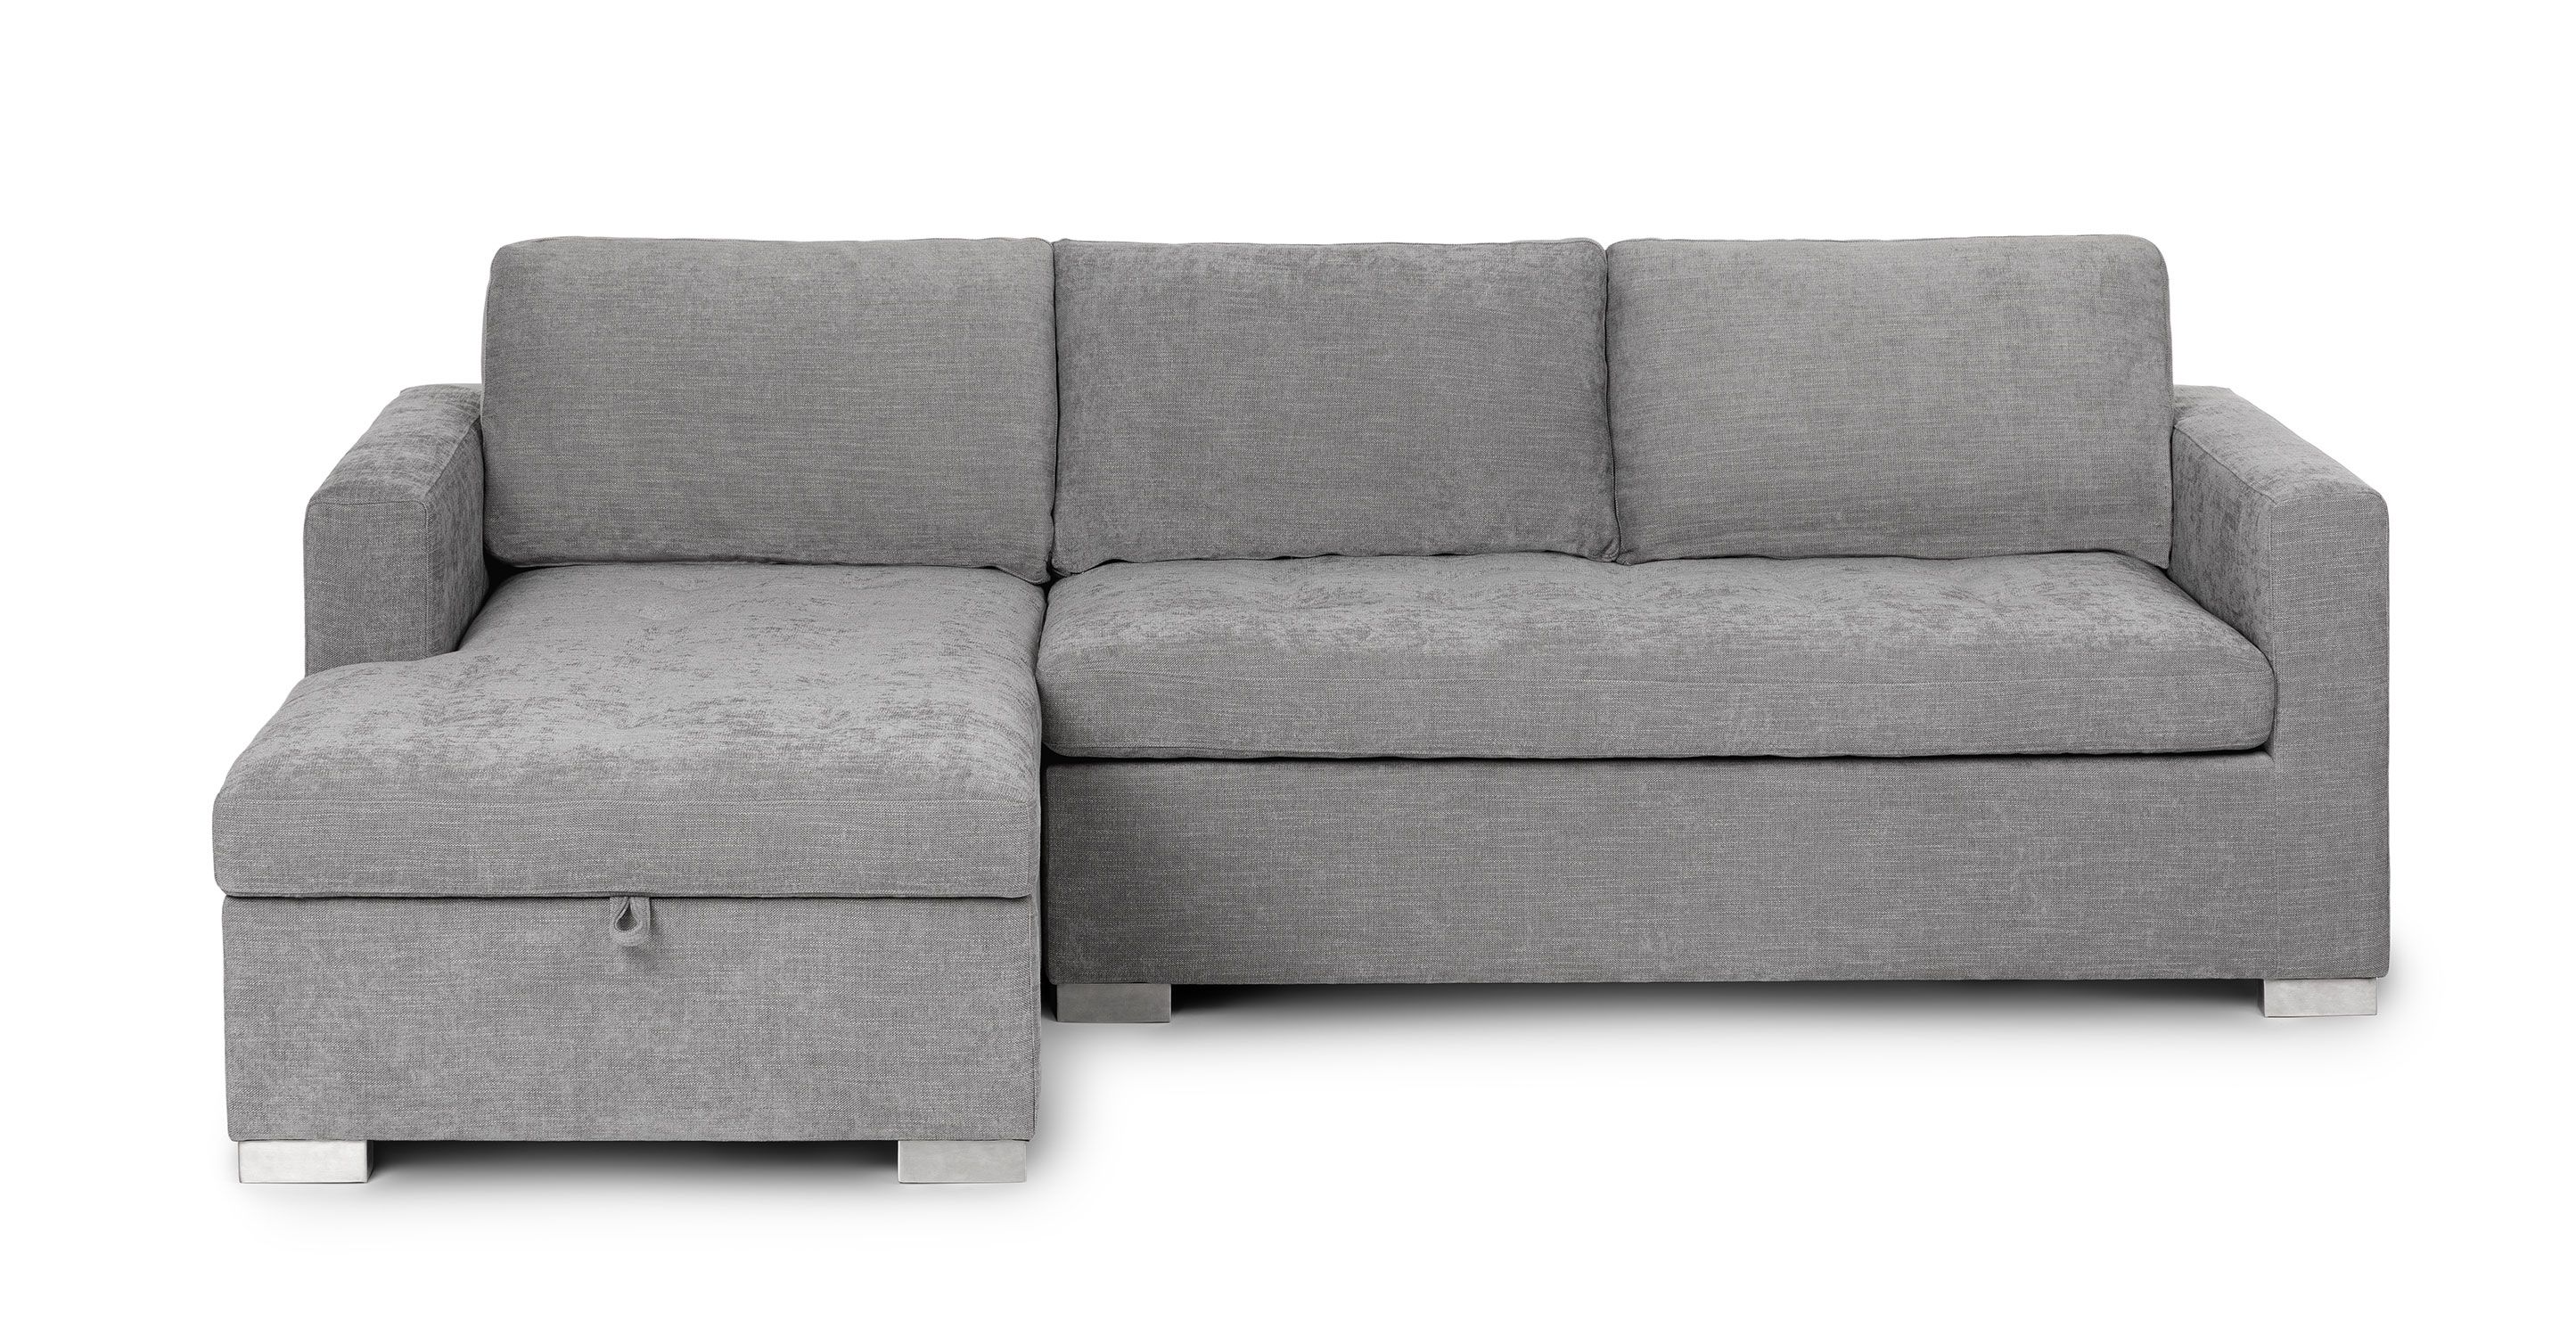 Left Facing Dawn Gray Fabric Sectional Sofa Bed | Soma | Article Inside Left Or Right Facing Sleeper Sectional Sofas (Photo 1 of 15)